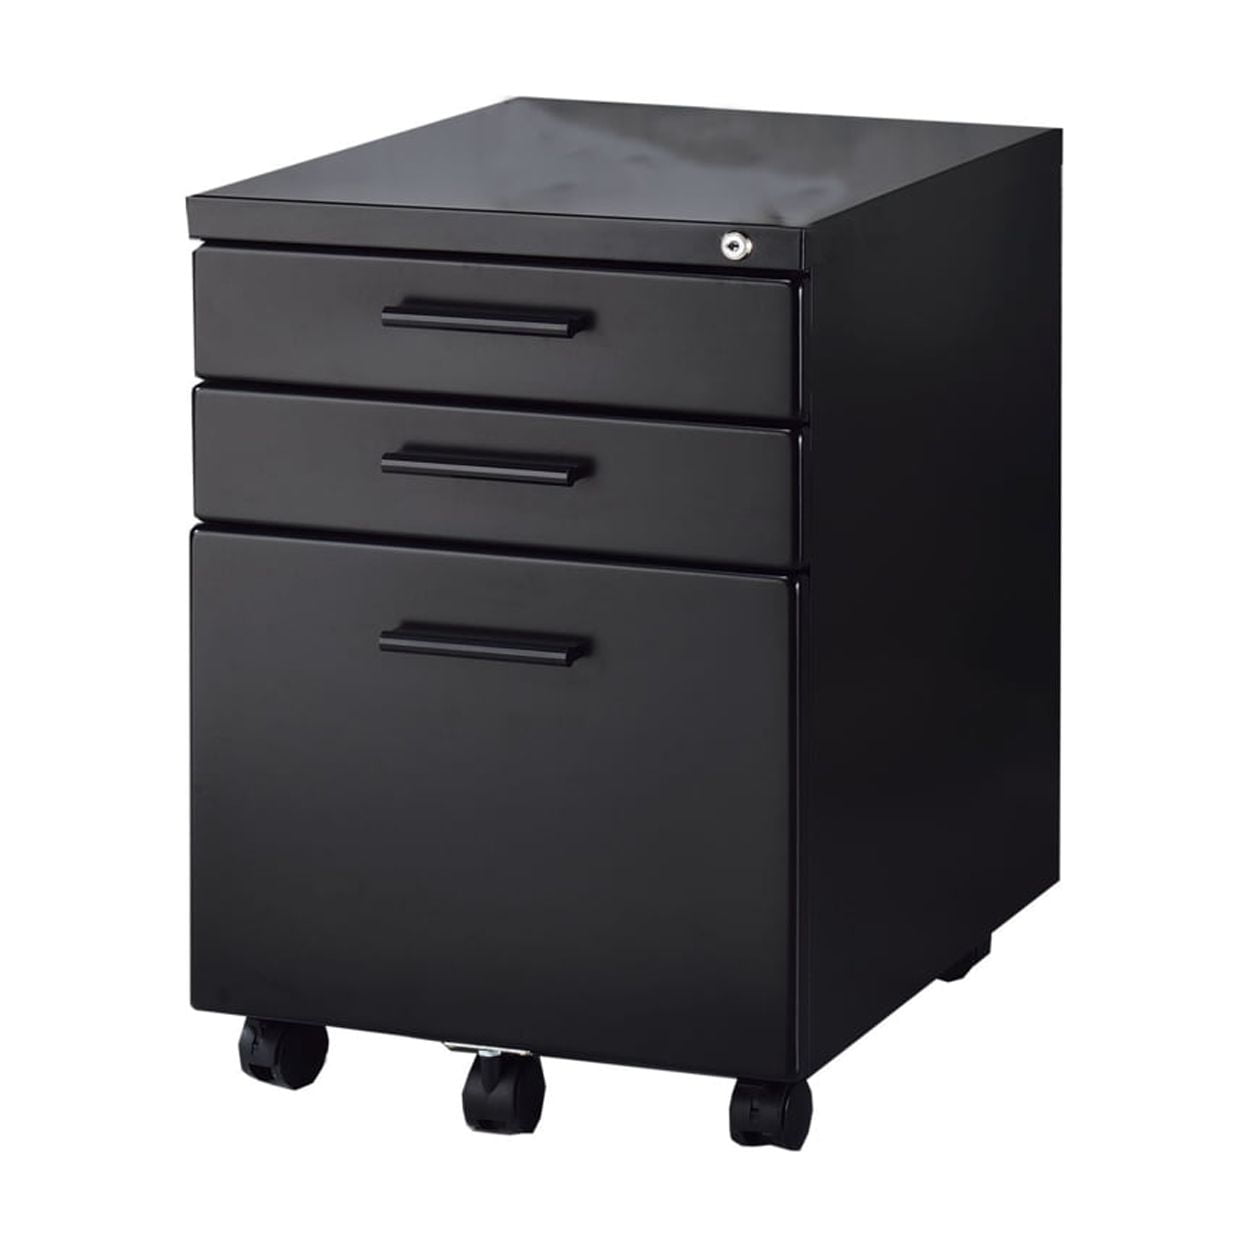 Bm209615 21 X 19 X 16 In. Contemporary Style File Cabinet With Lock System & Caster Support, Black